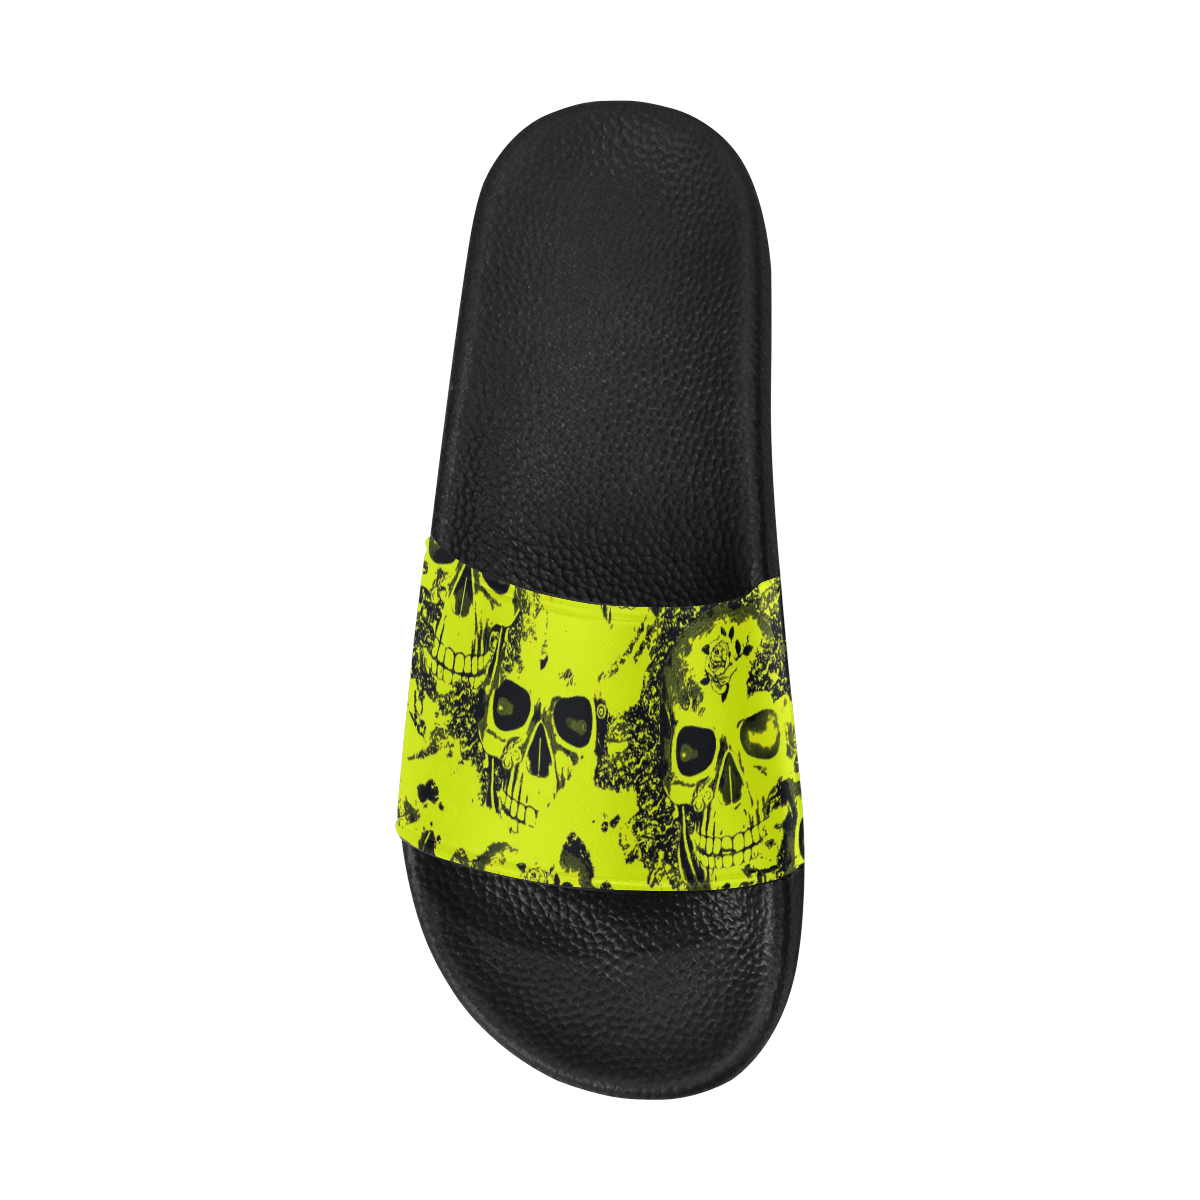 cloudy Skulls black yellow by JamColors Women's Slide Sandals (Model 057)